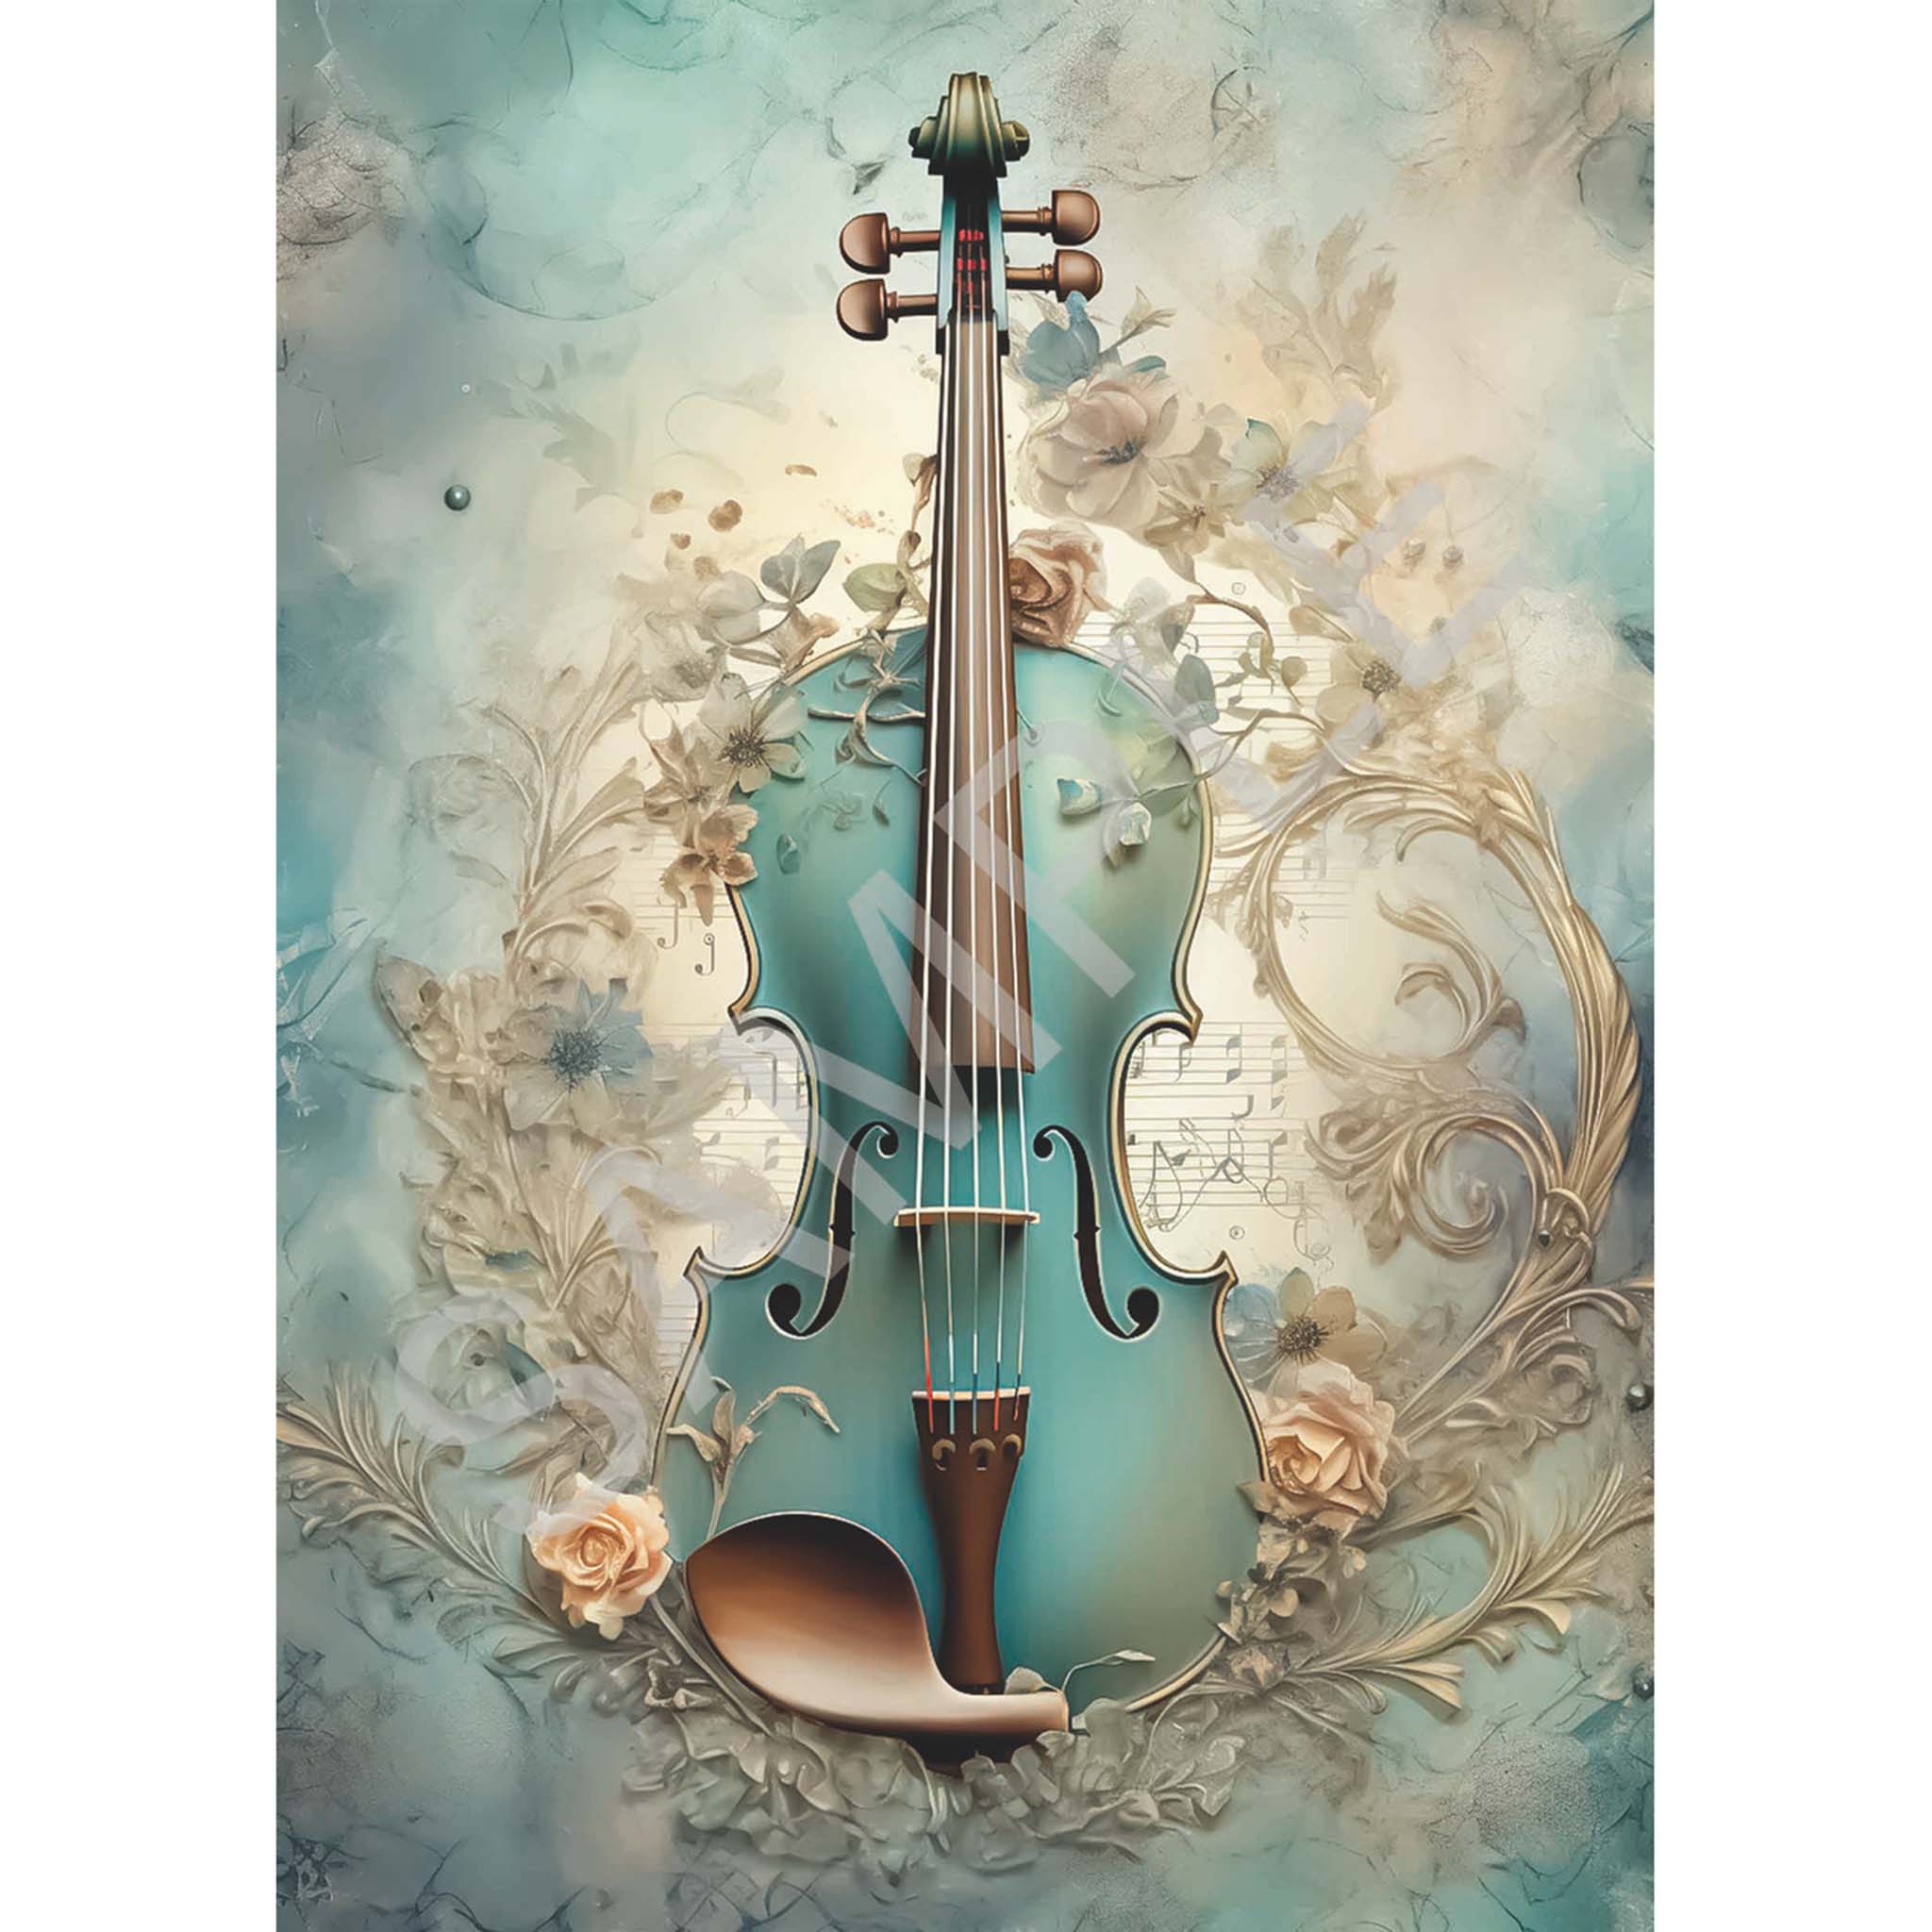 A4 rice paper design featuring an intricate blue violin resting among delicate rose blooms against a dreamy pastel backdrop. White borders are on the sides.